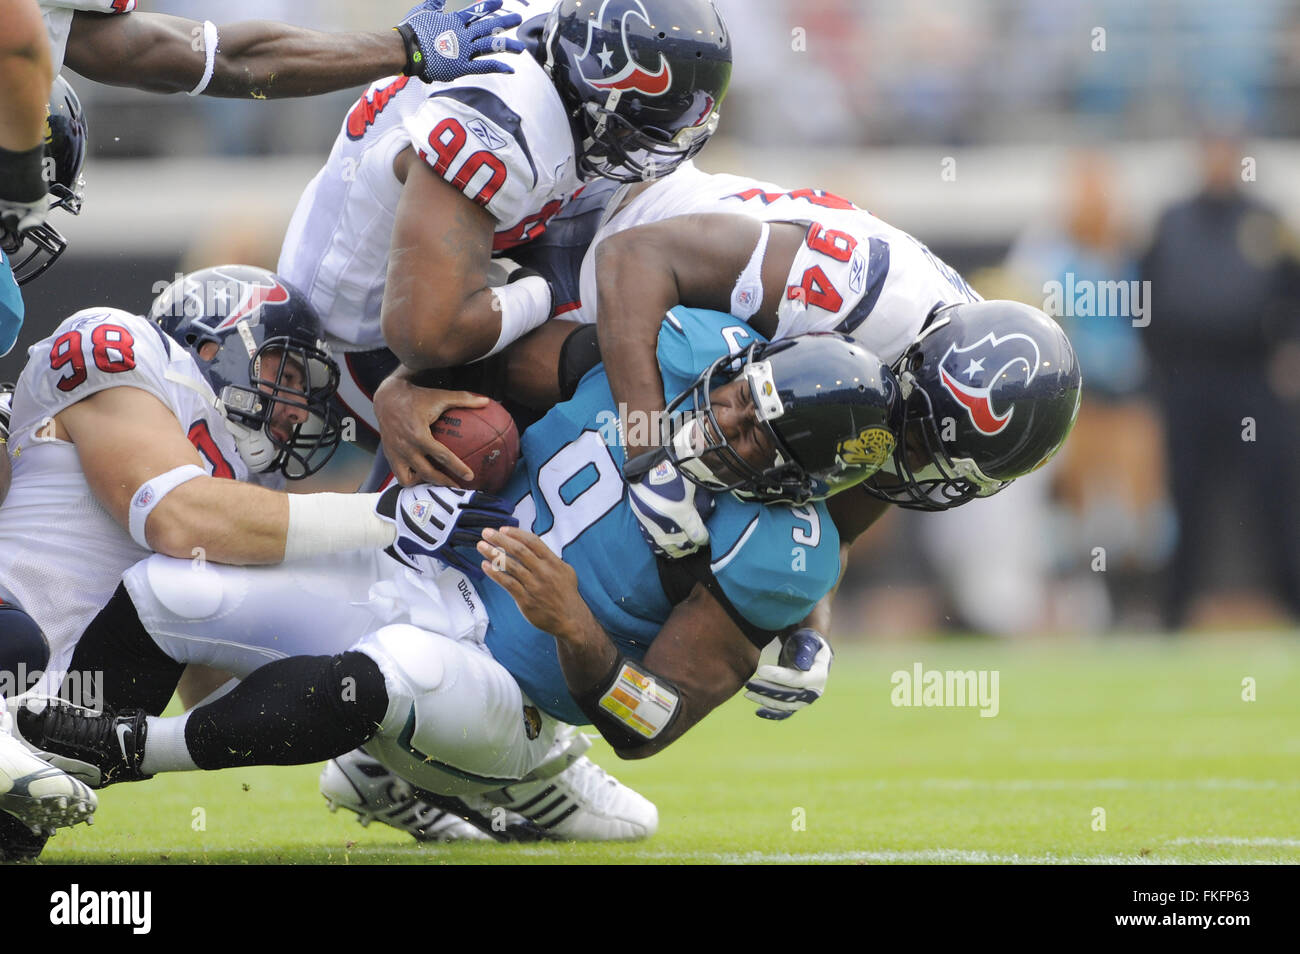 Jacksonville, Florida, UNITED STATES. 6th Dec, 2009. Dec. 6, 2009; Jacksonville, FL, USA; Jacksonville Jaguars quarterback David Garrard (9) is sacked by Houston Texans defensive end Antonio Smith (94), defensive end Mario Williams (90) and defensive end Connor Barwin (98) during their game at Jacksonville Municipal Stadium. ZUMA Press/Scott A. Miller © Scott A. Miller/ZUMA Wire/Alamy Live News Stock Photo